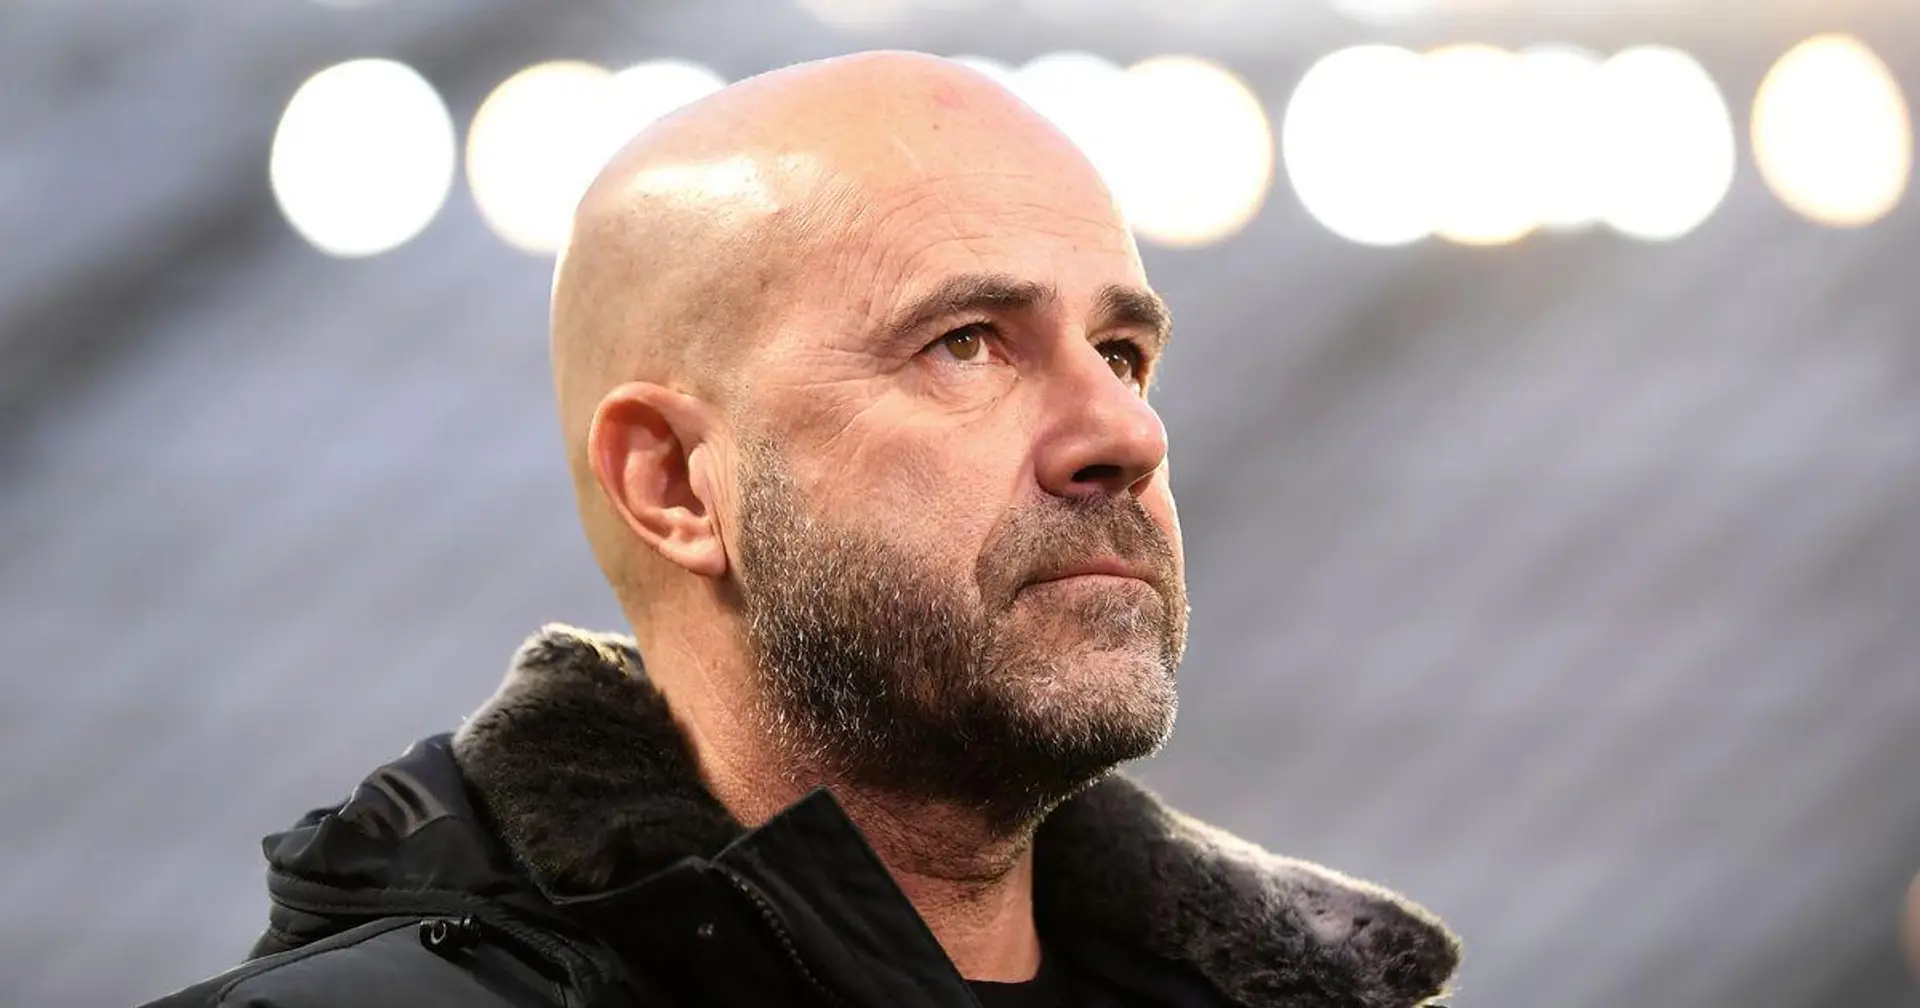 'There is no fear': Leverkusen boss Peter Bosz confident restarting Bundesliga season is right thing to do